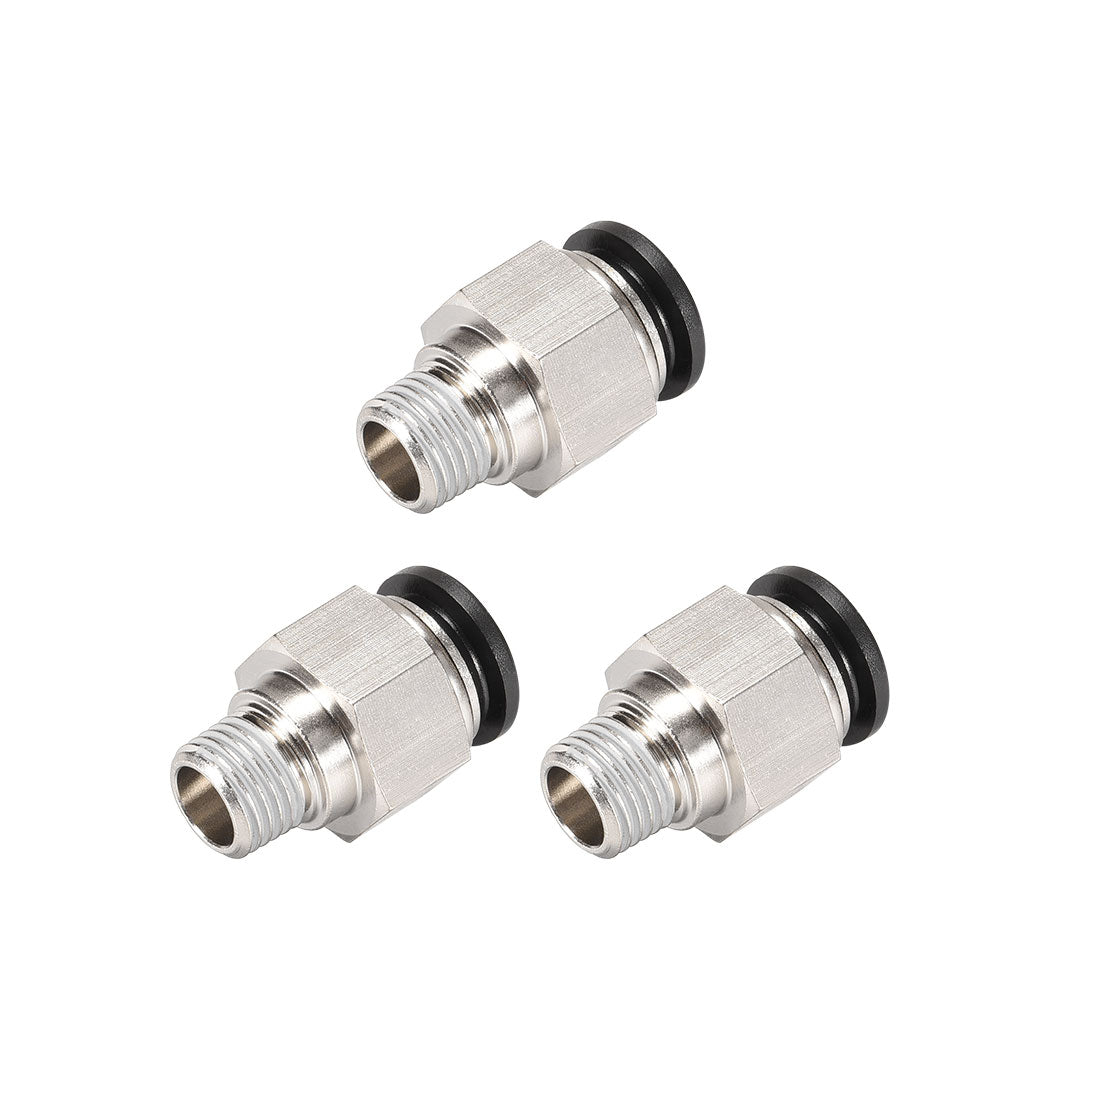 uxcell Uxcell Straight Pneumatic Push to Quick Connect Fittings 1/4NPT Male x 12mm Tube OD Silver Tone 3pcs